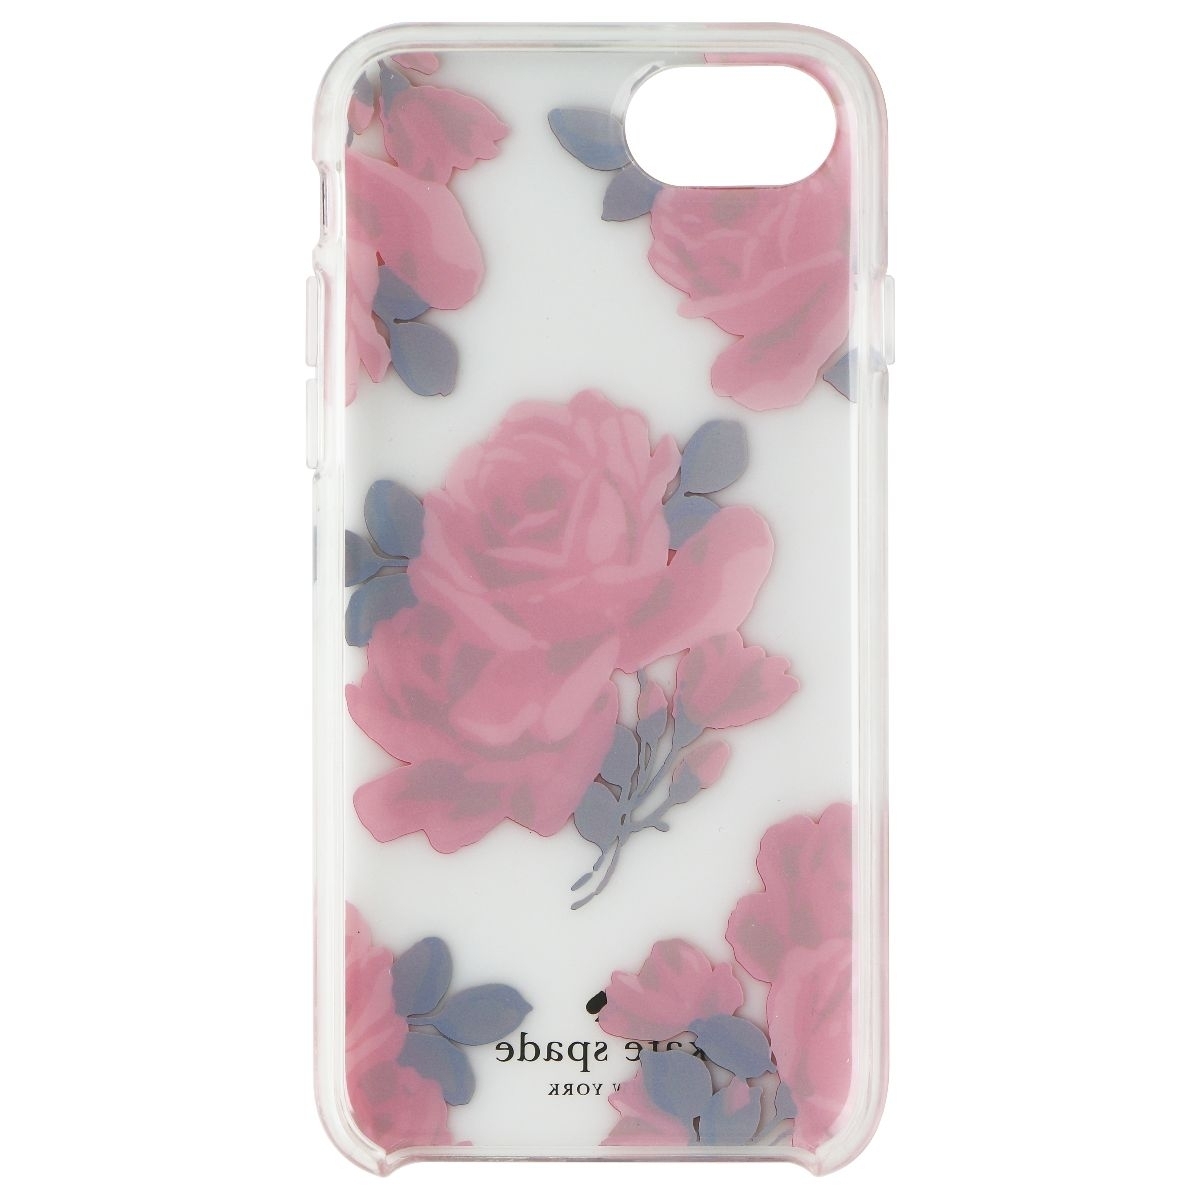 Kate Spade Protective Hardshell Case For Apple IPhone 7 - Clear/Pink Roses (Refurbished)